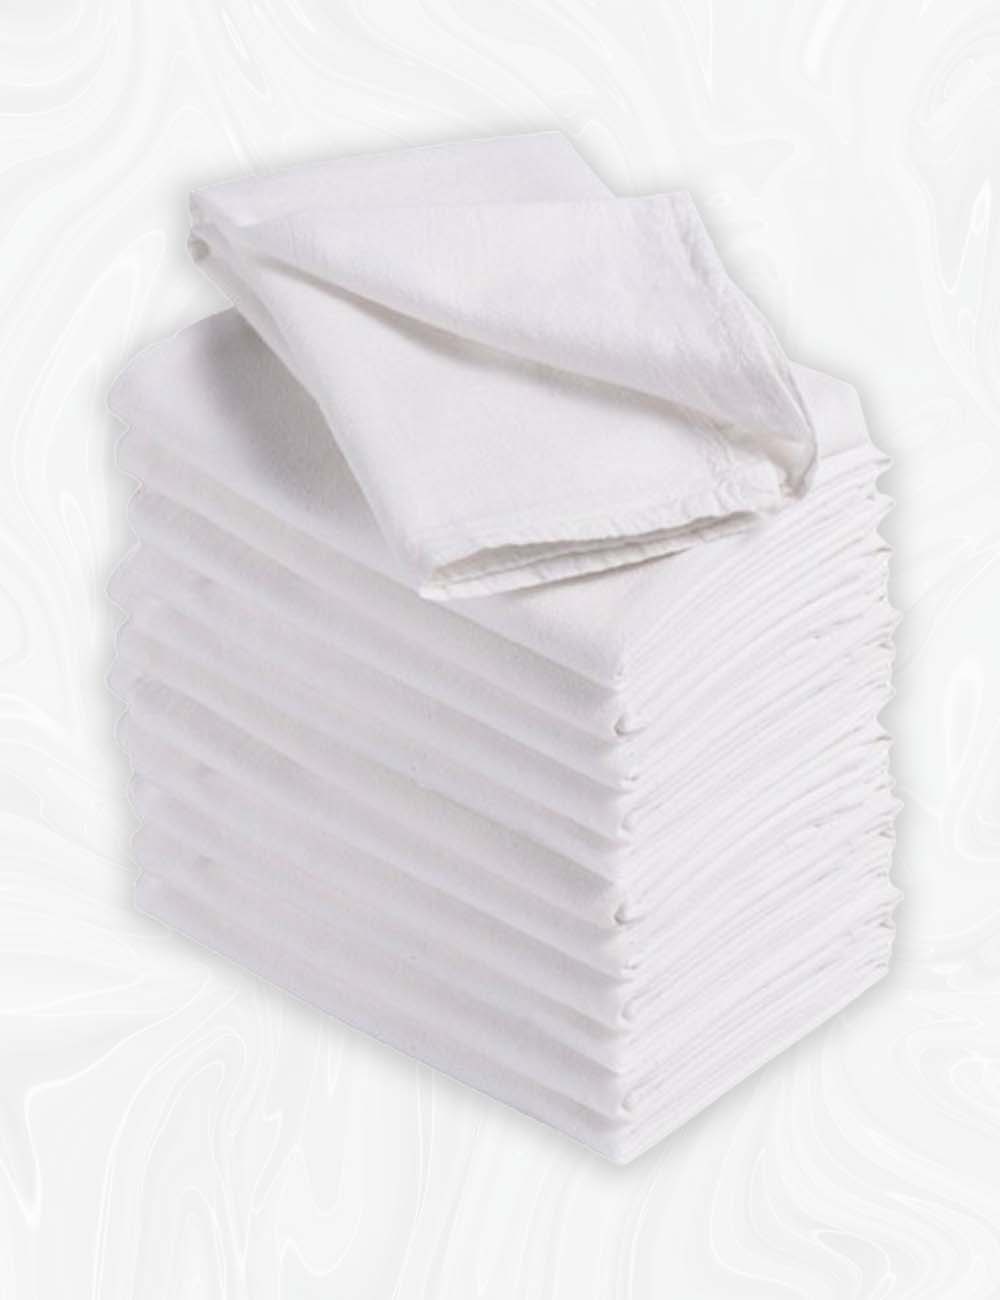 Home Labels Kitchen Flour-Sack Towels, Pack of 12 Towels - 28 x 28 Inches, 100% Pure Ring Spun Cotton, Hand Towels, Multi-Purpose, Highly Absorbent